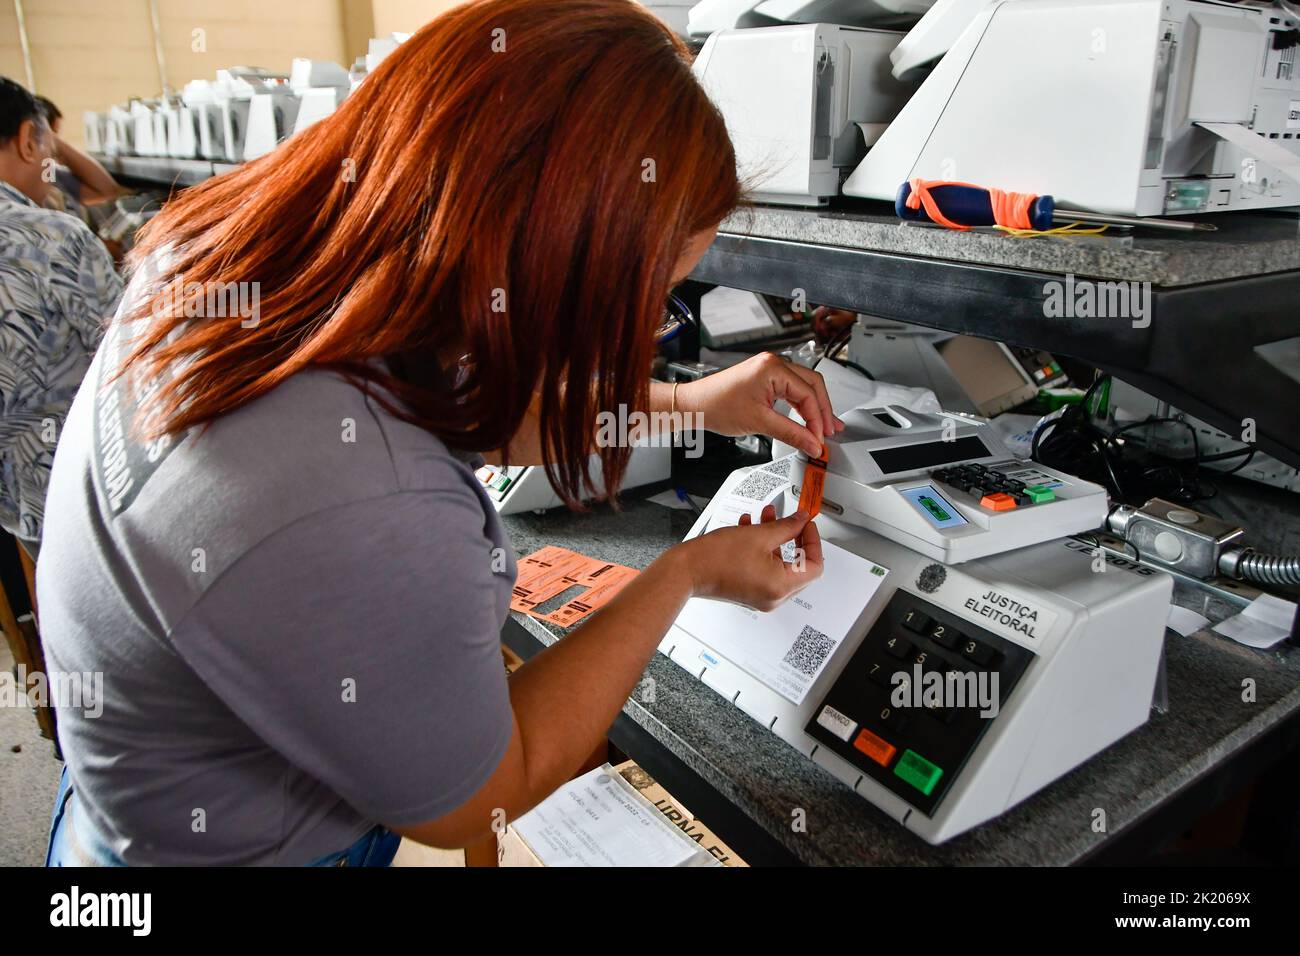 BRASÍLIA, DF - 21.09.2022: TRE REALIZA LACRAÇÃO DAS URNAS ELETRÔNICAS - Photo, TRE employee sealing the electronic ballot box. This Wednesday (21) the TRE of the Federal District began the process of sealing and putting in boxes the electronic ballot boxes to distribute in the region's elections. (Photo: Ton Molina/Fotoarena) Stock Photo